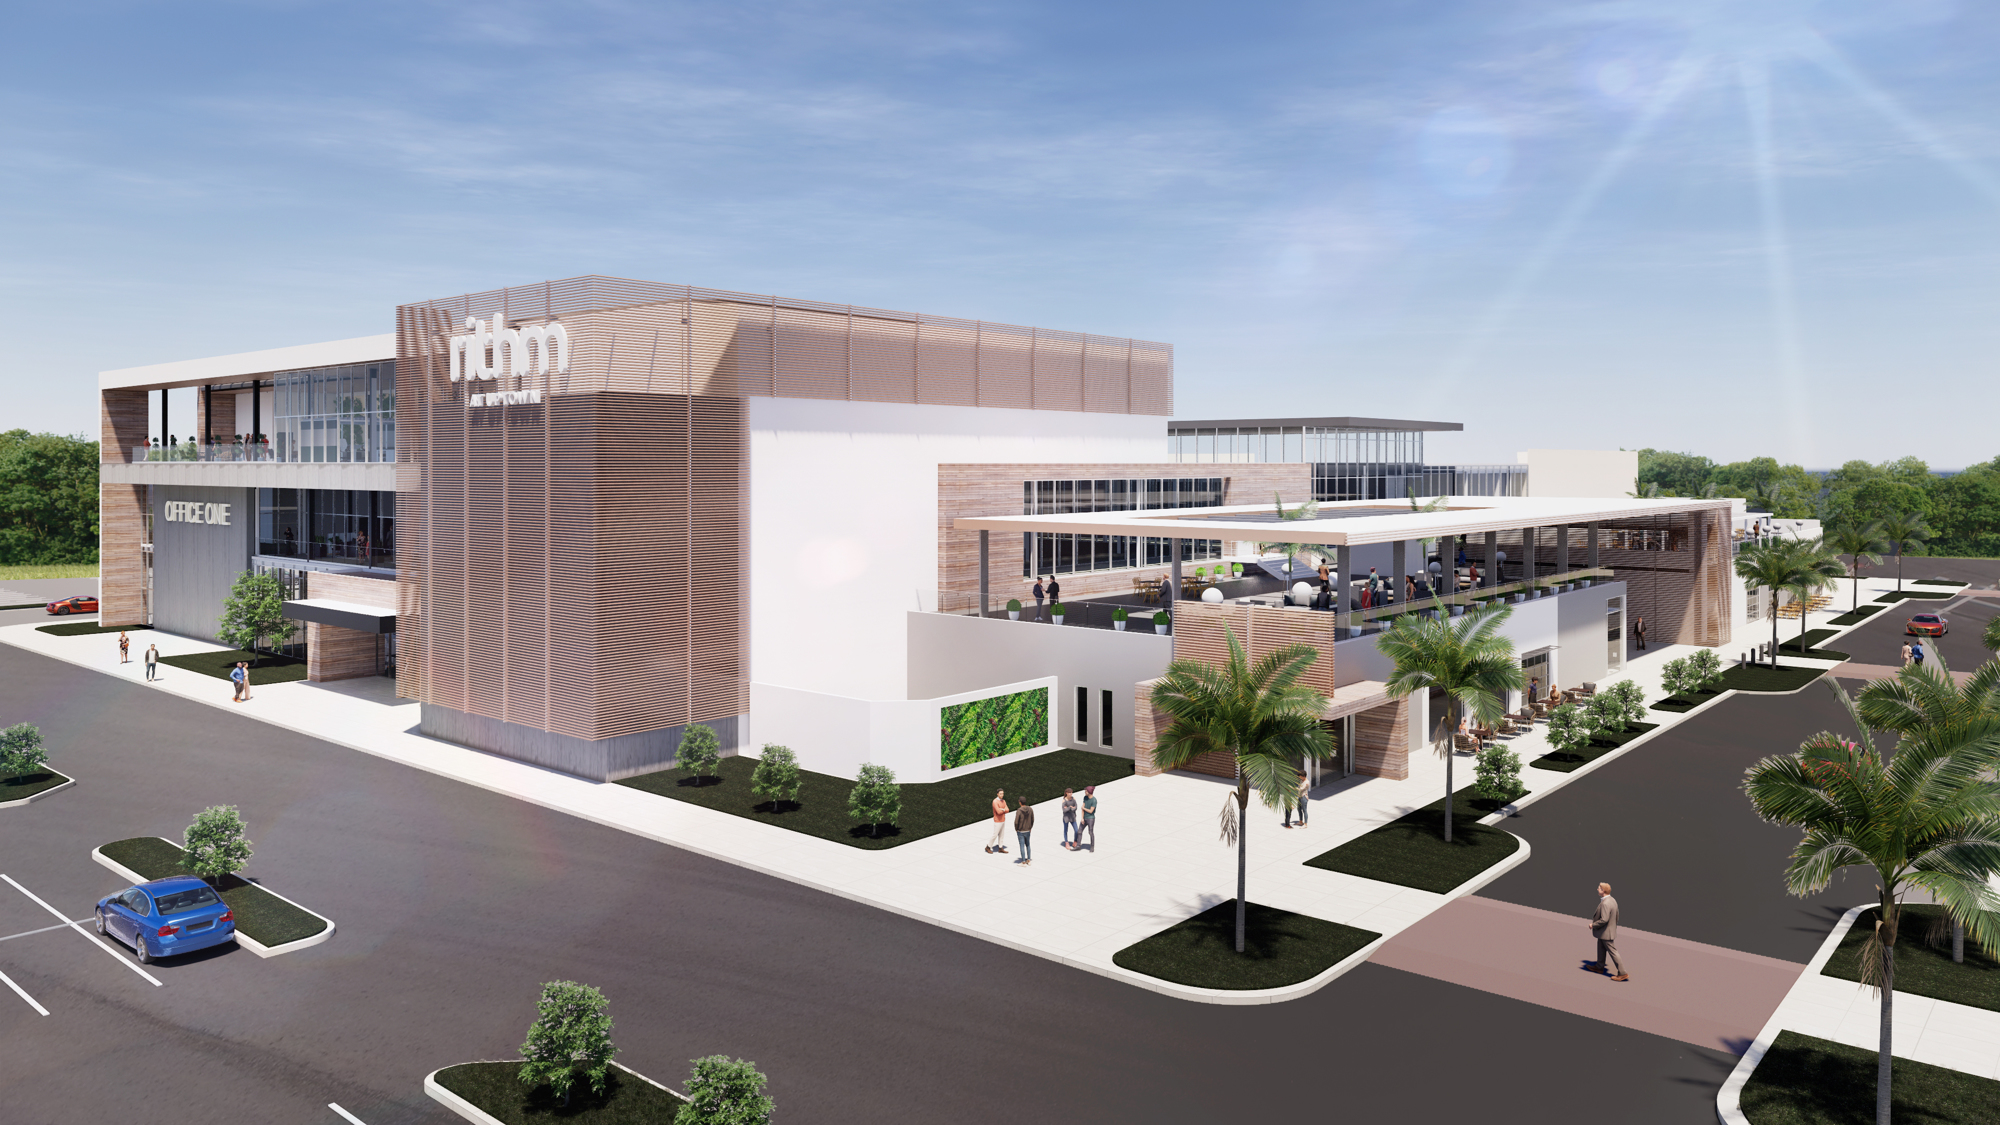 Courtesy. An exterior rendering of the planned 215,000-square-foot, mixed-use office building, named Base Camp, at Rithm At Uptown. The building replaces what was the J.C. Penney in the former University Mall.